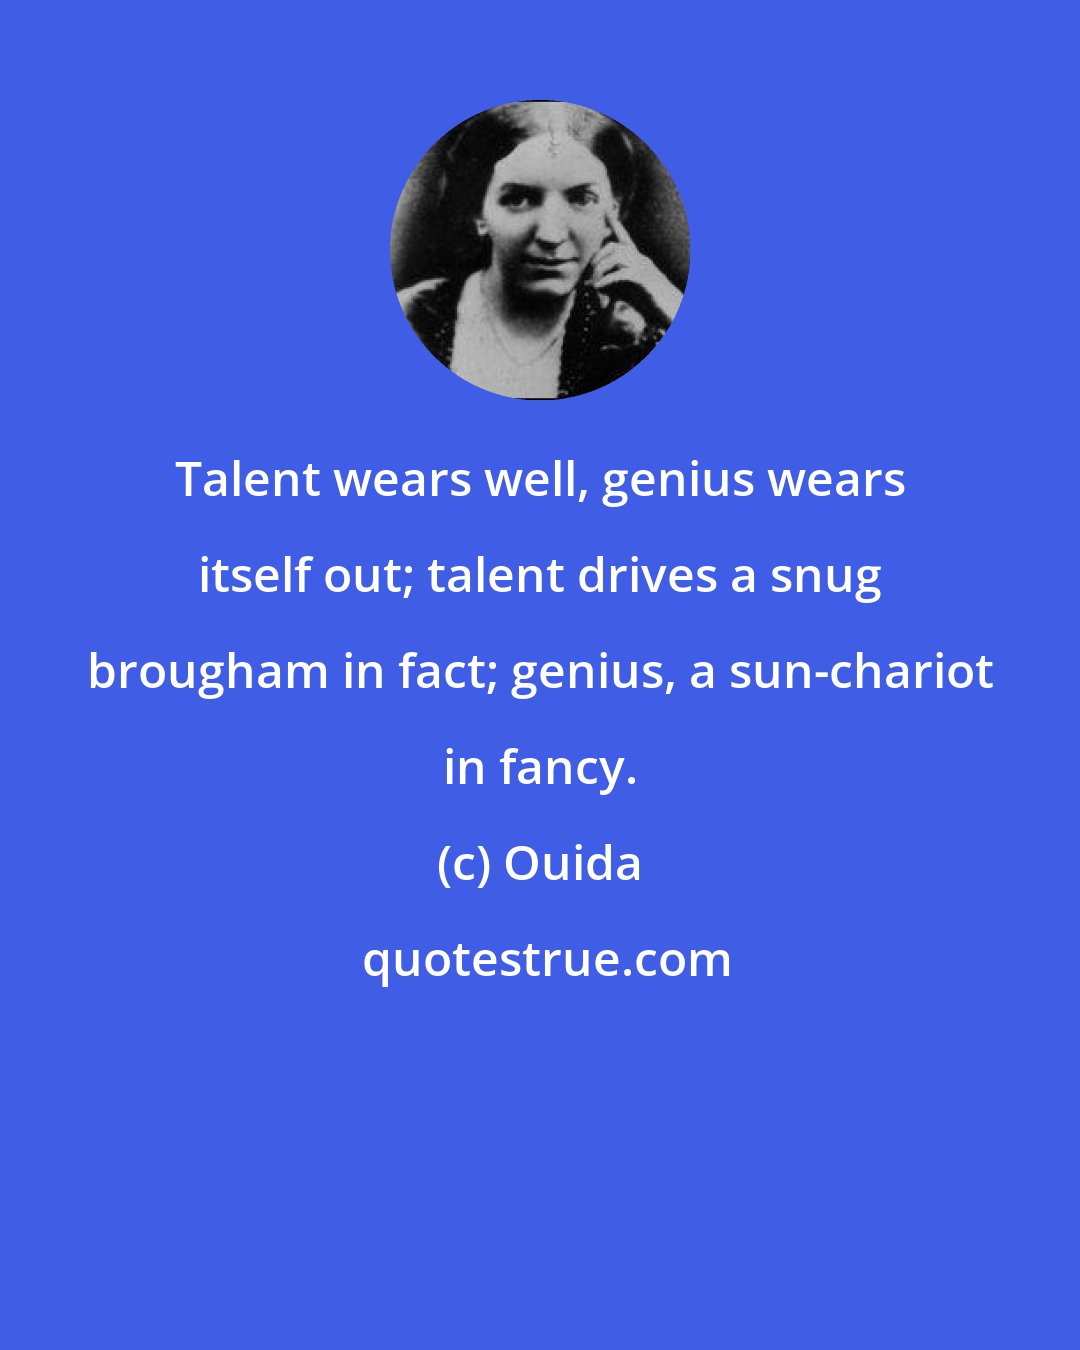 Ouida: Talent wears well, genius wears itself out; talent drives a snug brougham in fact; genius, a sun-chariot in fancy.